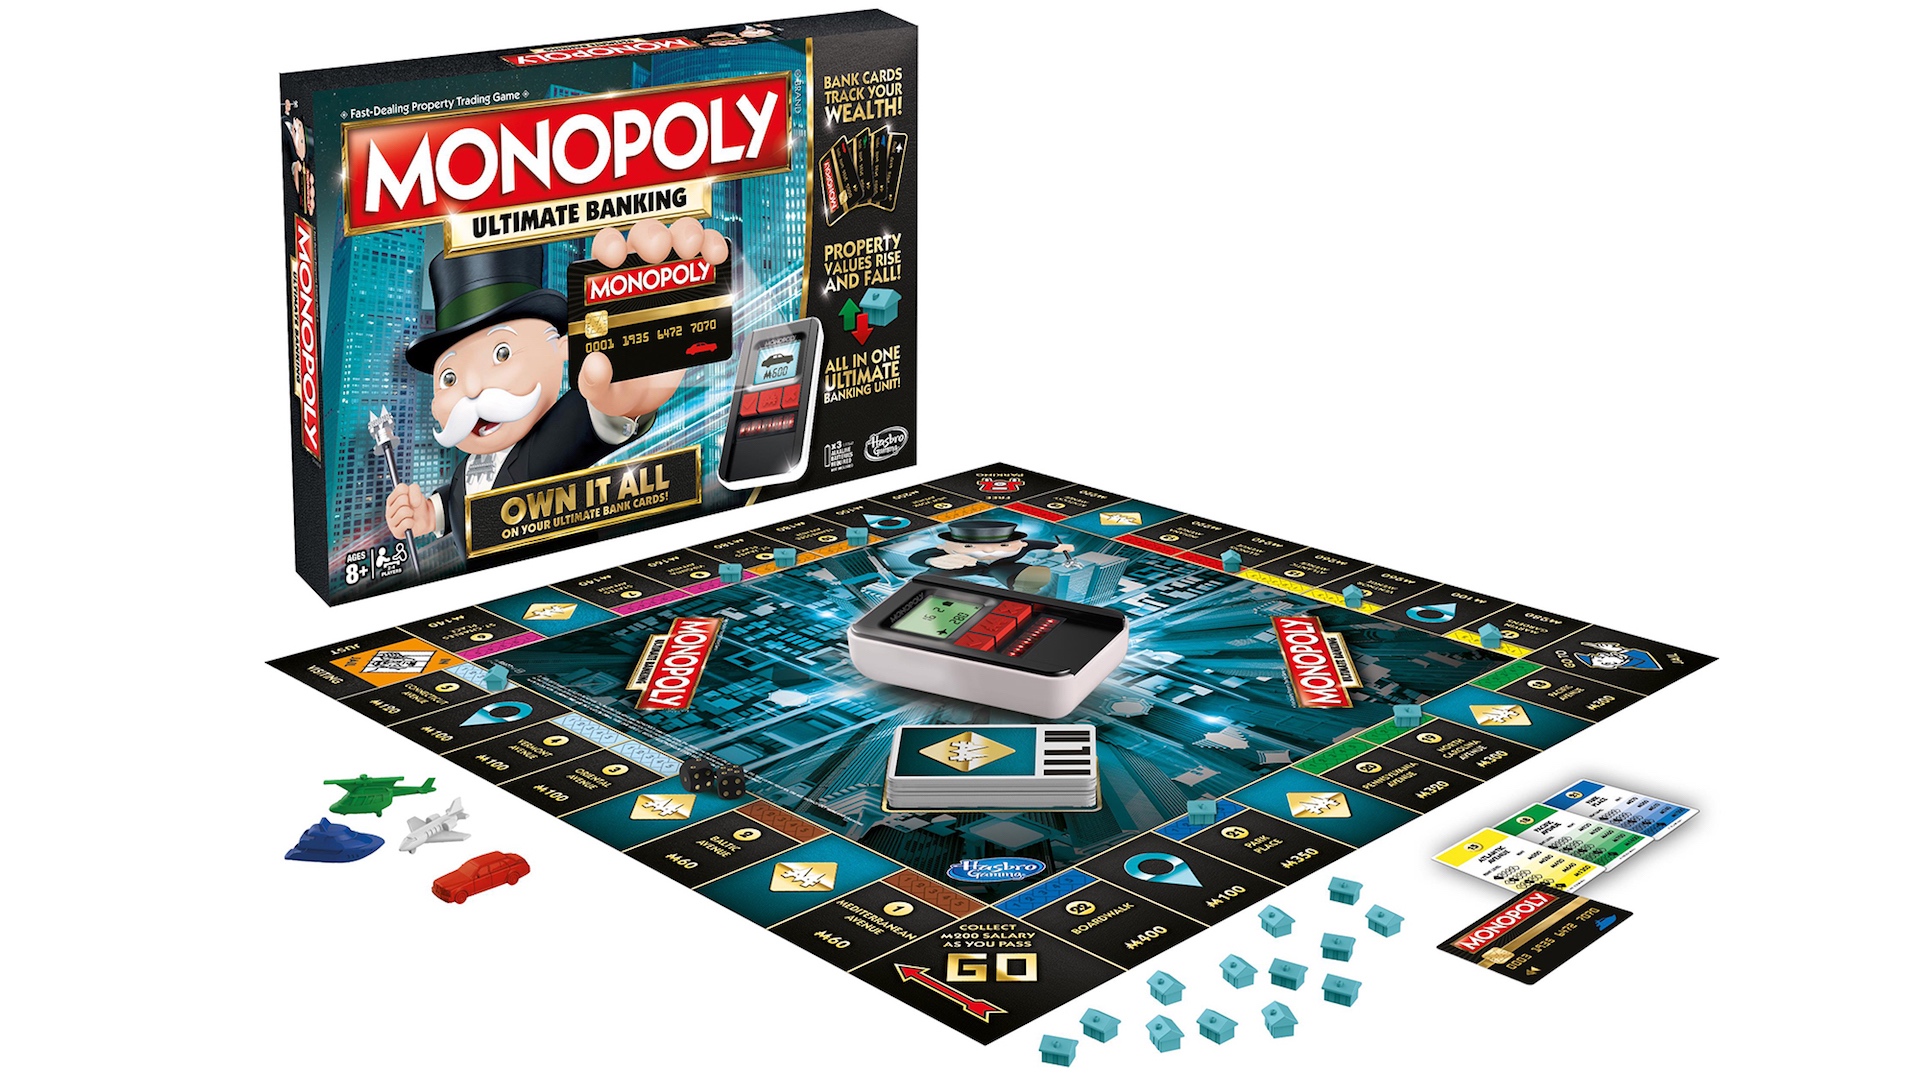 what are the rules of monopoly